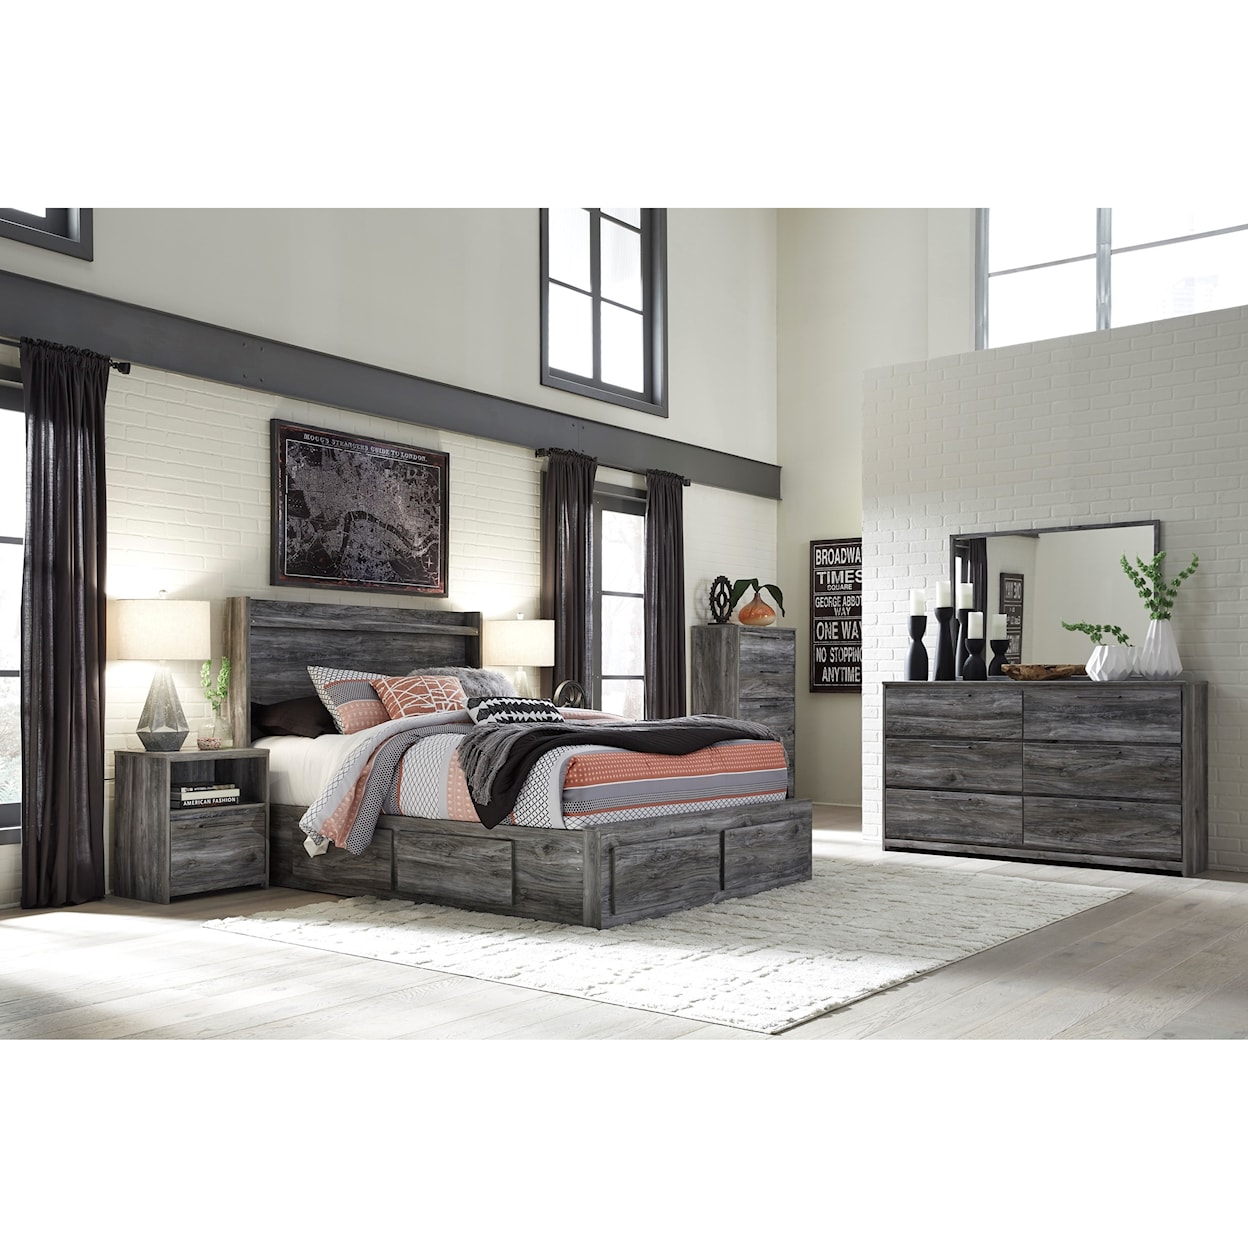 Signature Design Baystorm Queen Storage Bed with 6 Drawers